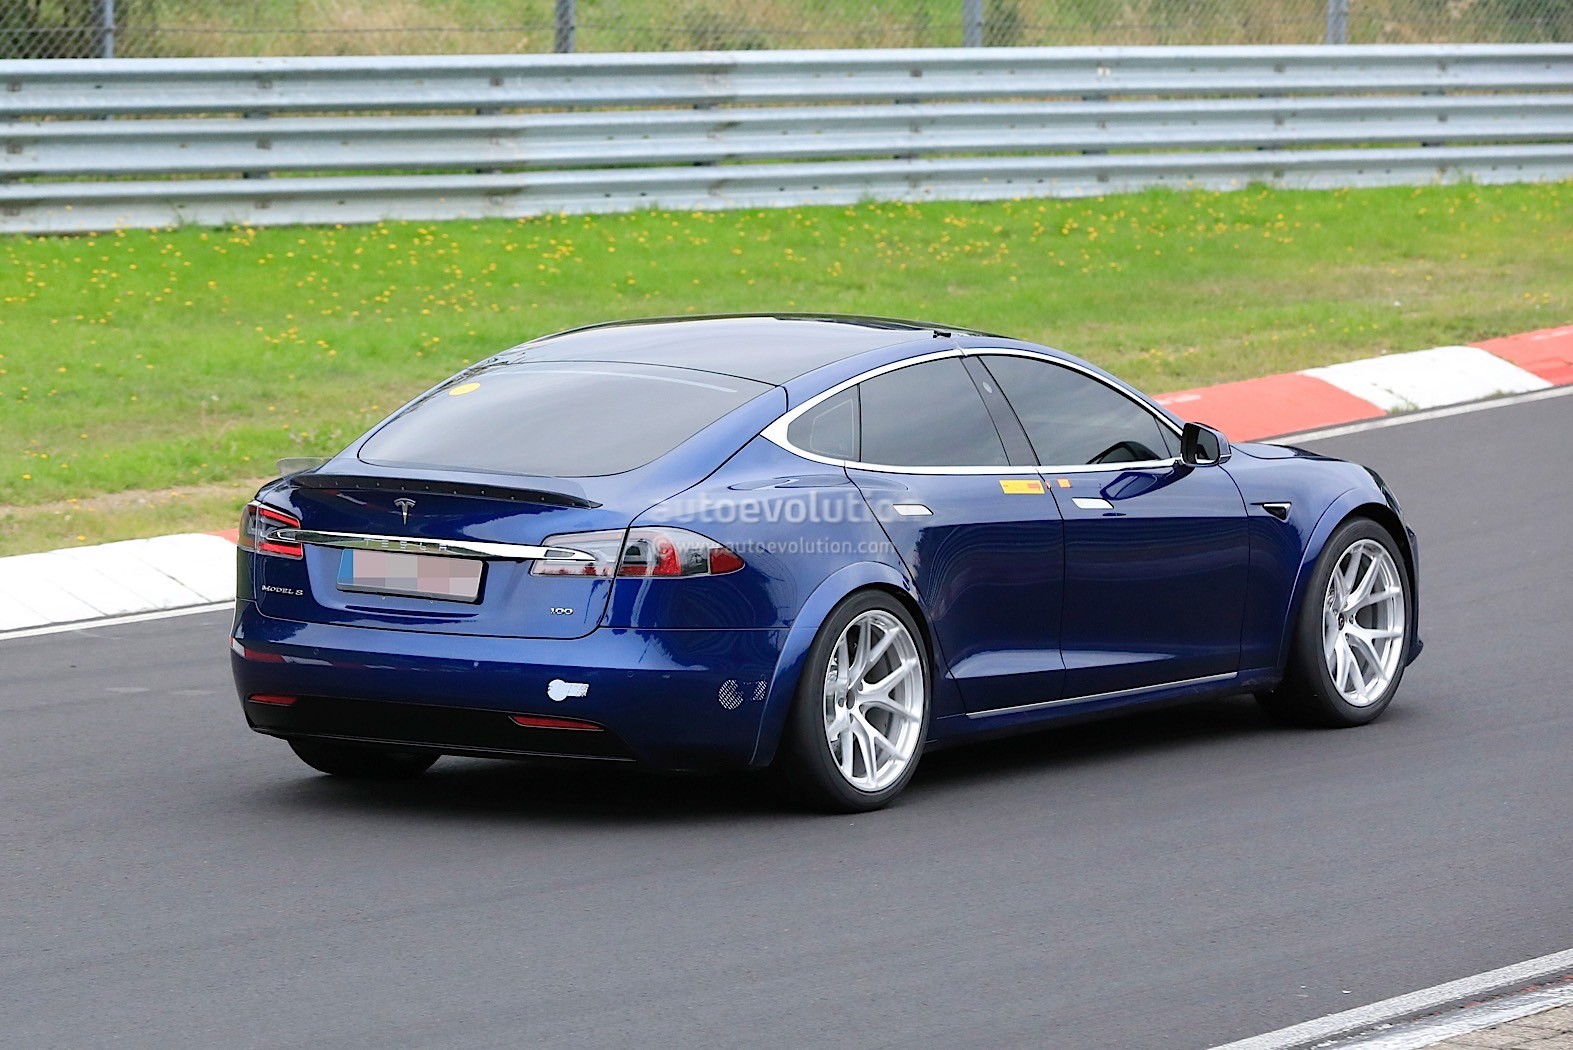 Tesla Model S Plaid Loses Giant Rear Wing, Does One Nurburgring Lap at